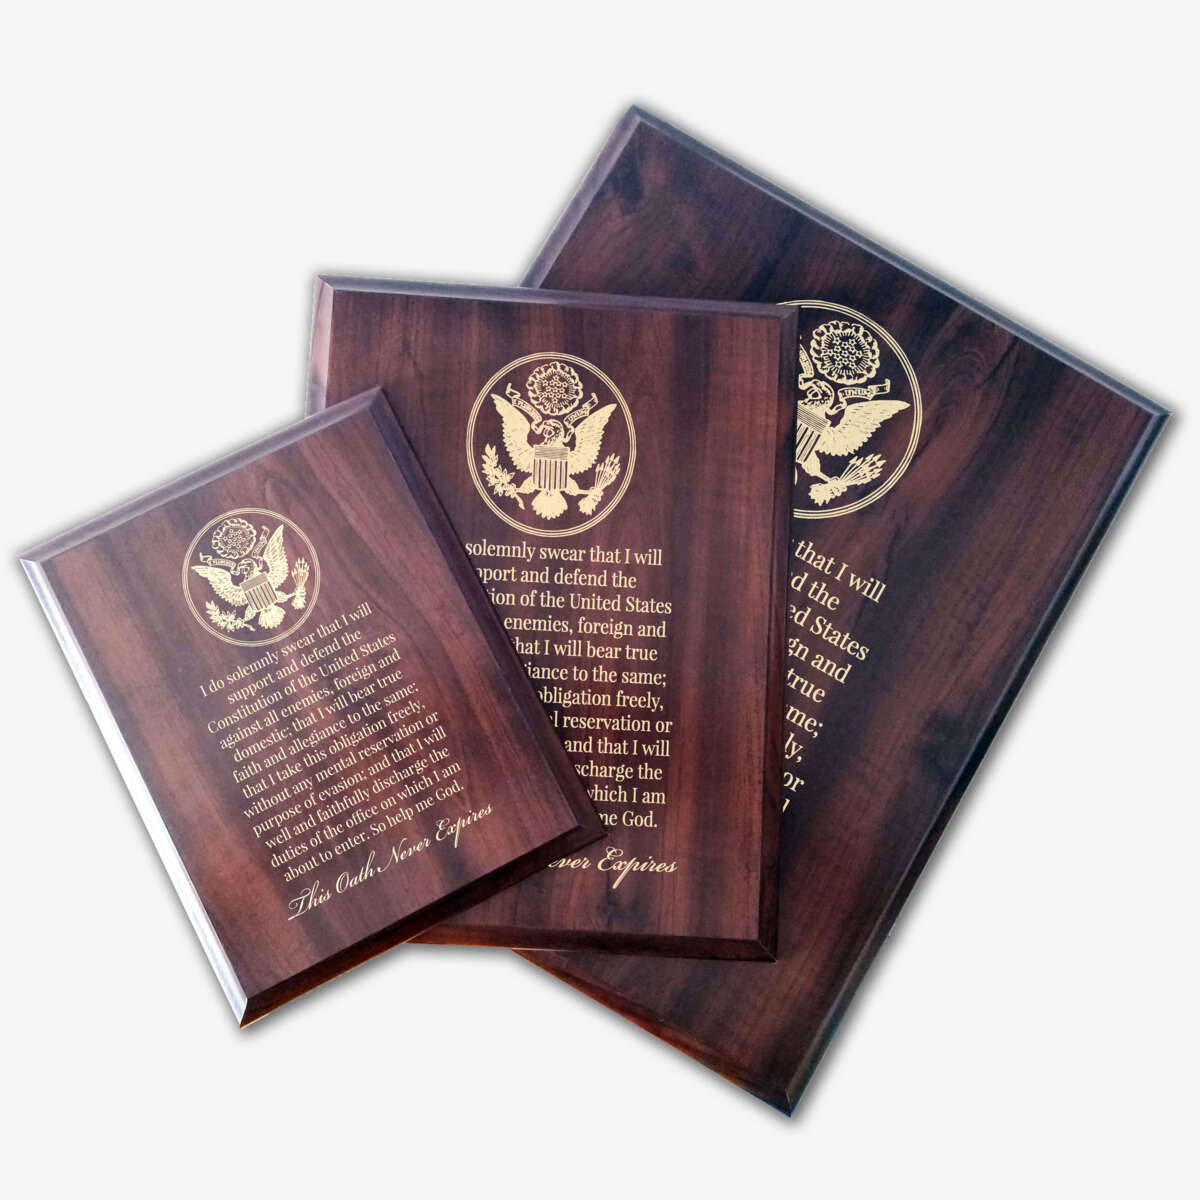 Photo of different sizes of the plaque spread out.